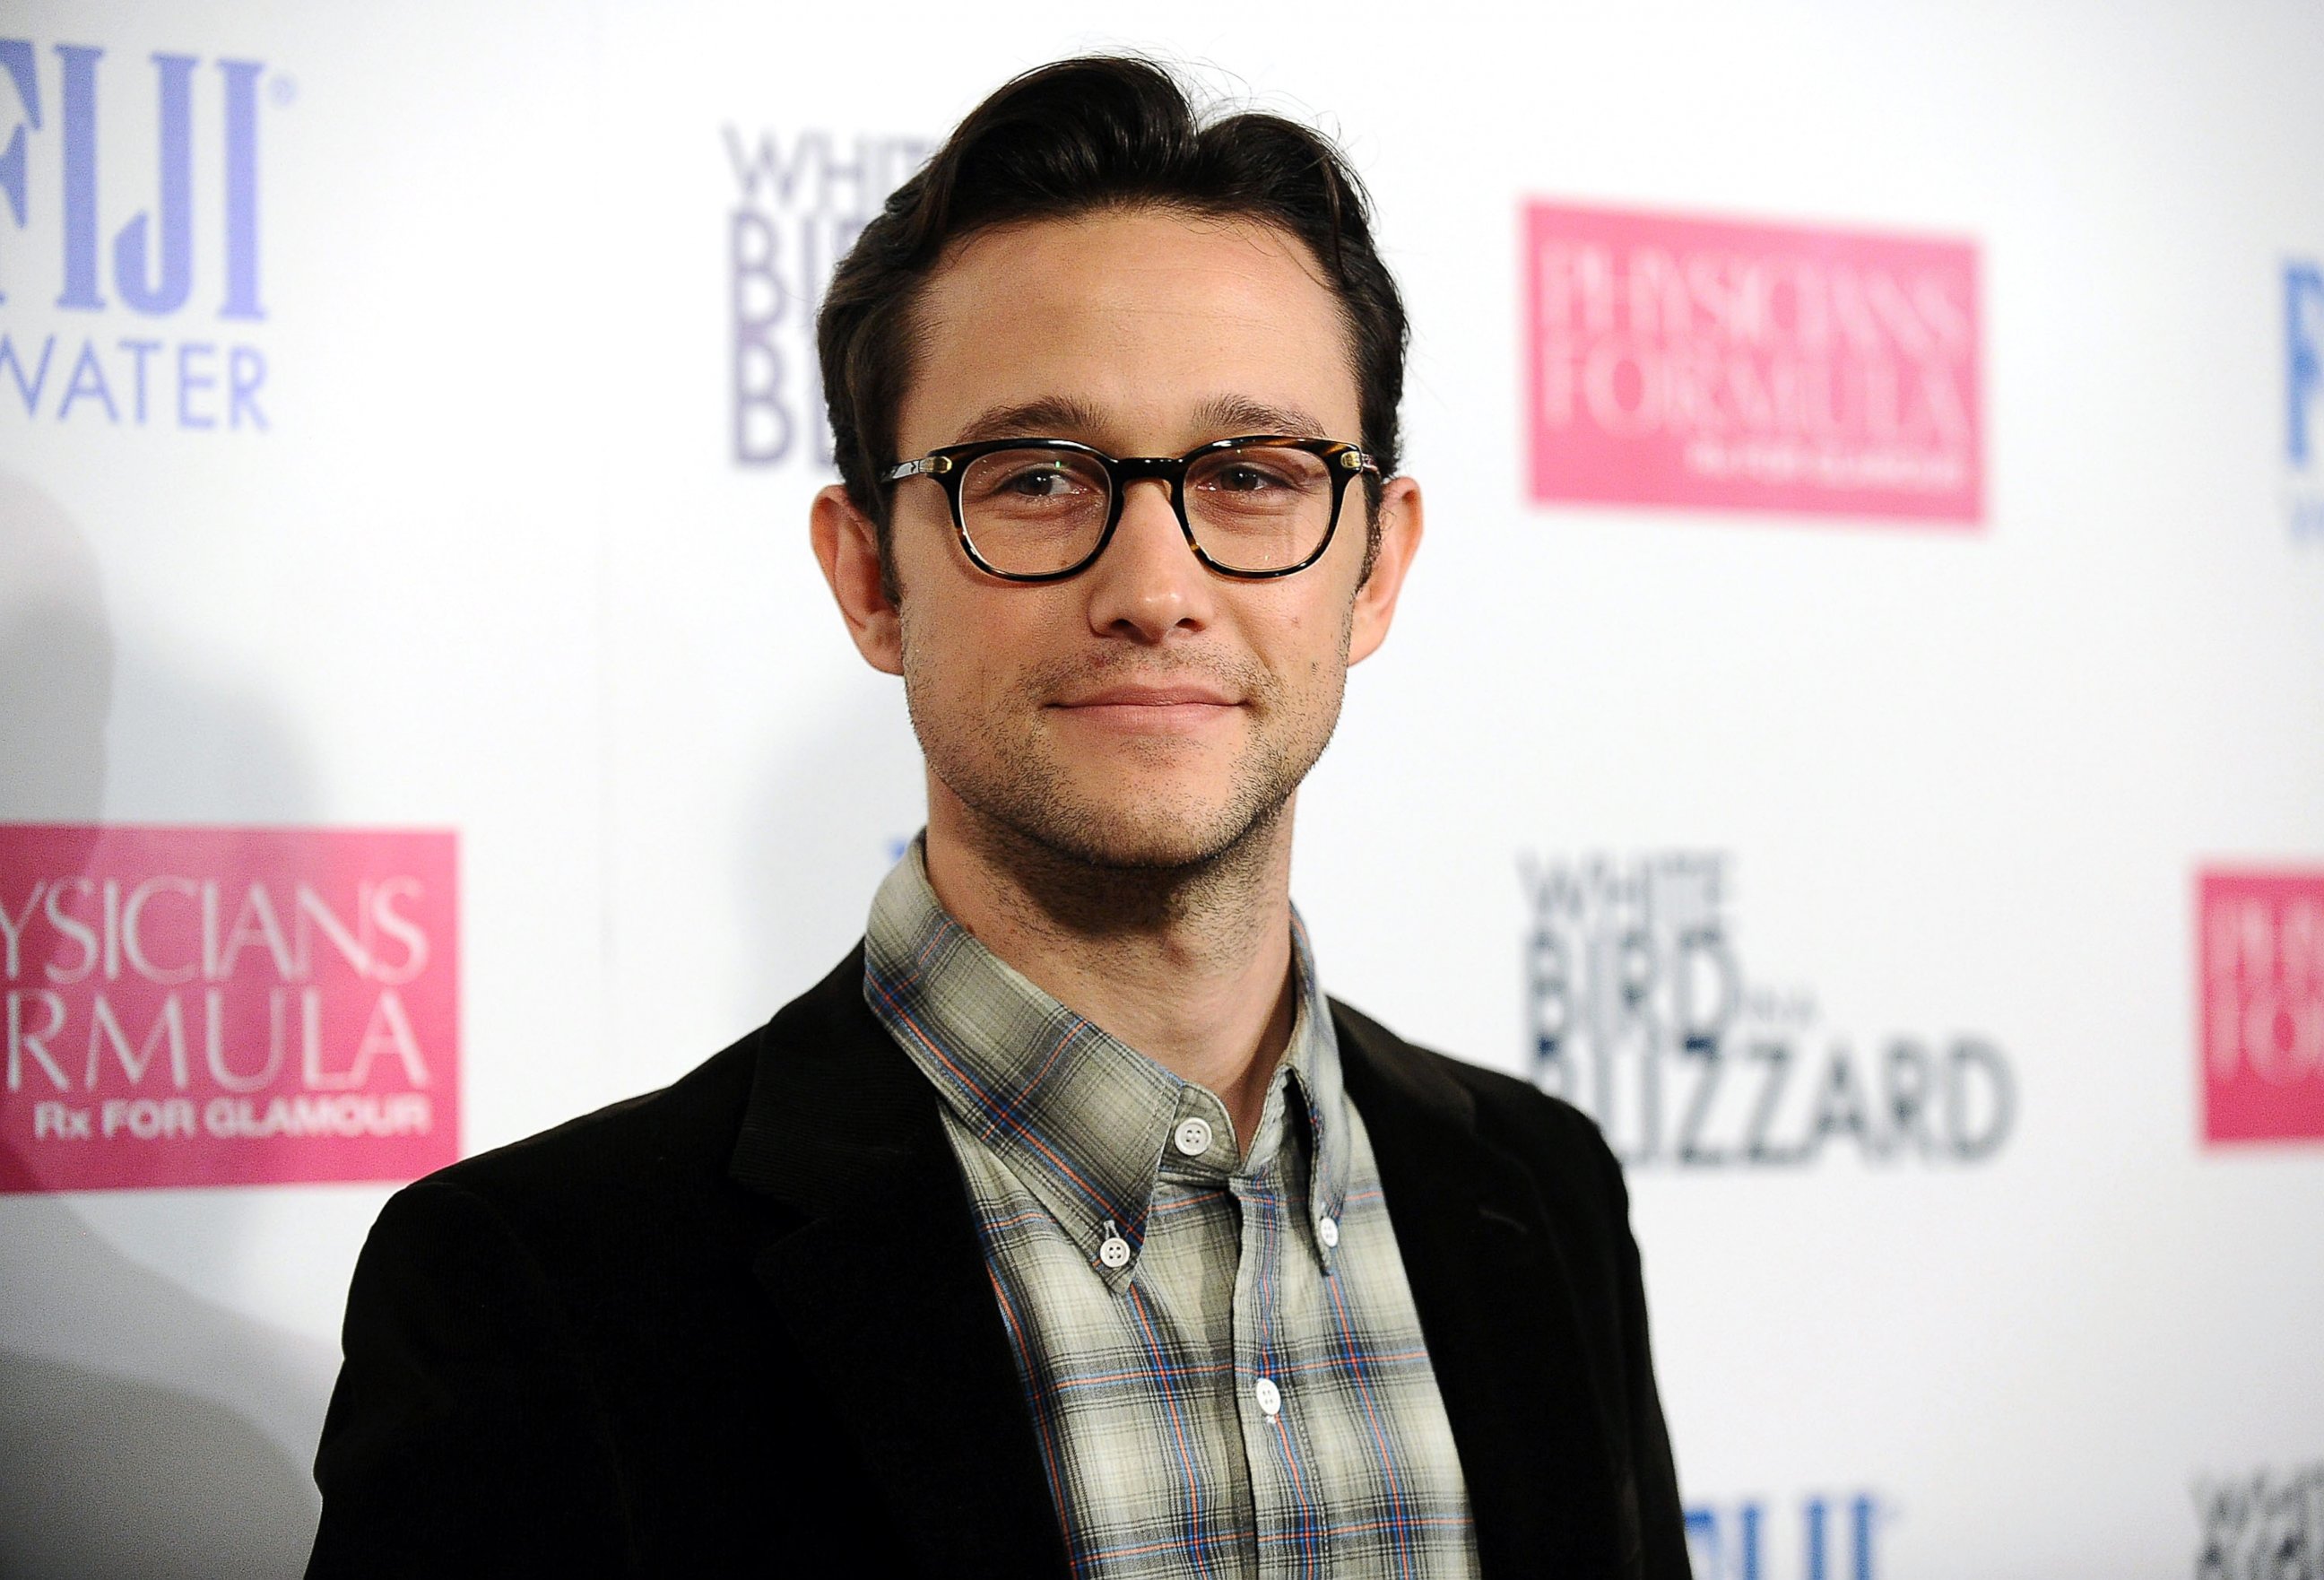 PHOTO: Joseph Gordon-Levitt attends the premiere of "White Bird in a Blizzard" at ArcLight Hollywood, Oct. 21, 2014 in Hollywood, Calif.